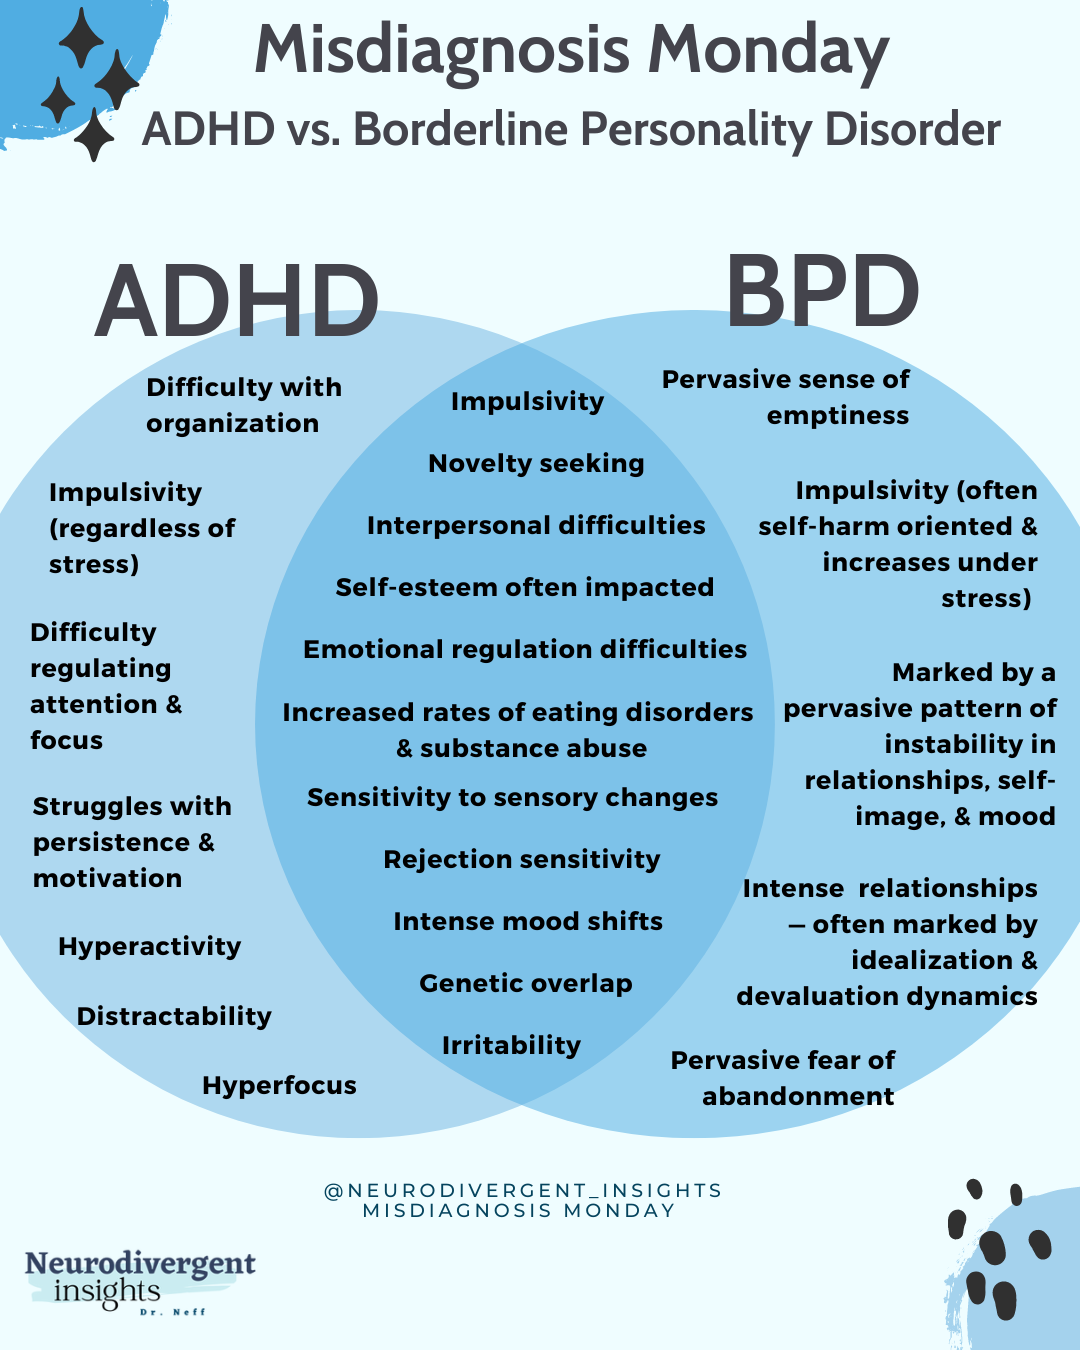 4 Types of severe Borderline Personality Disorder